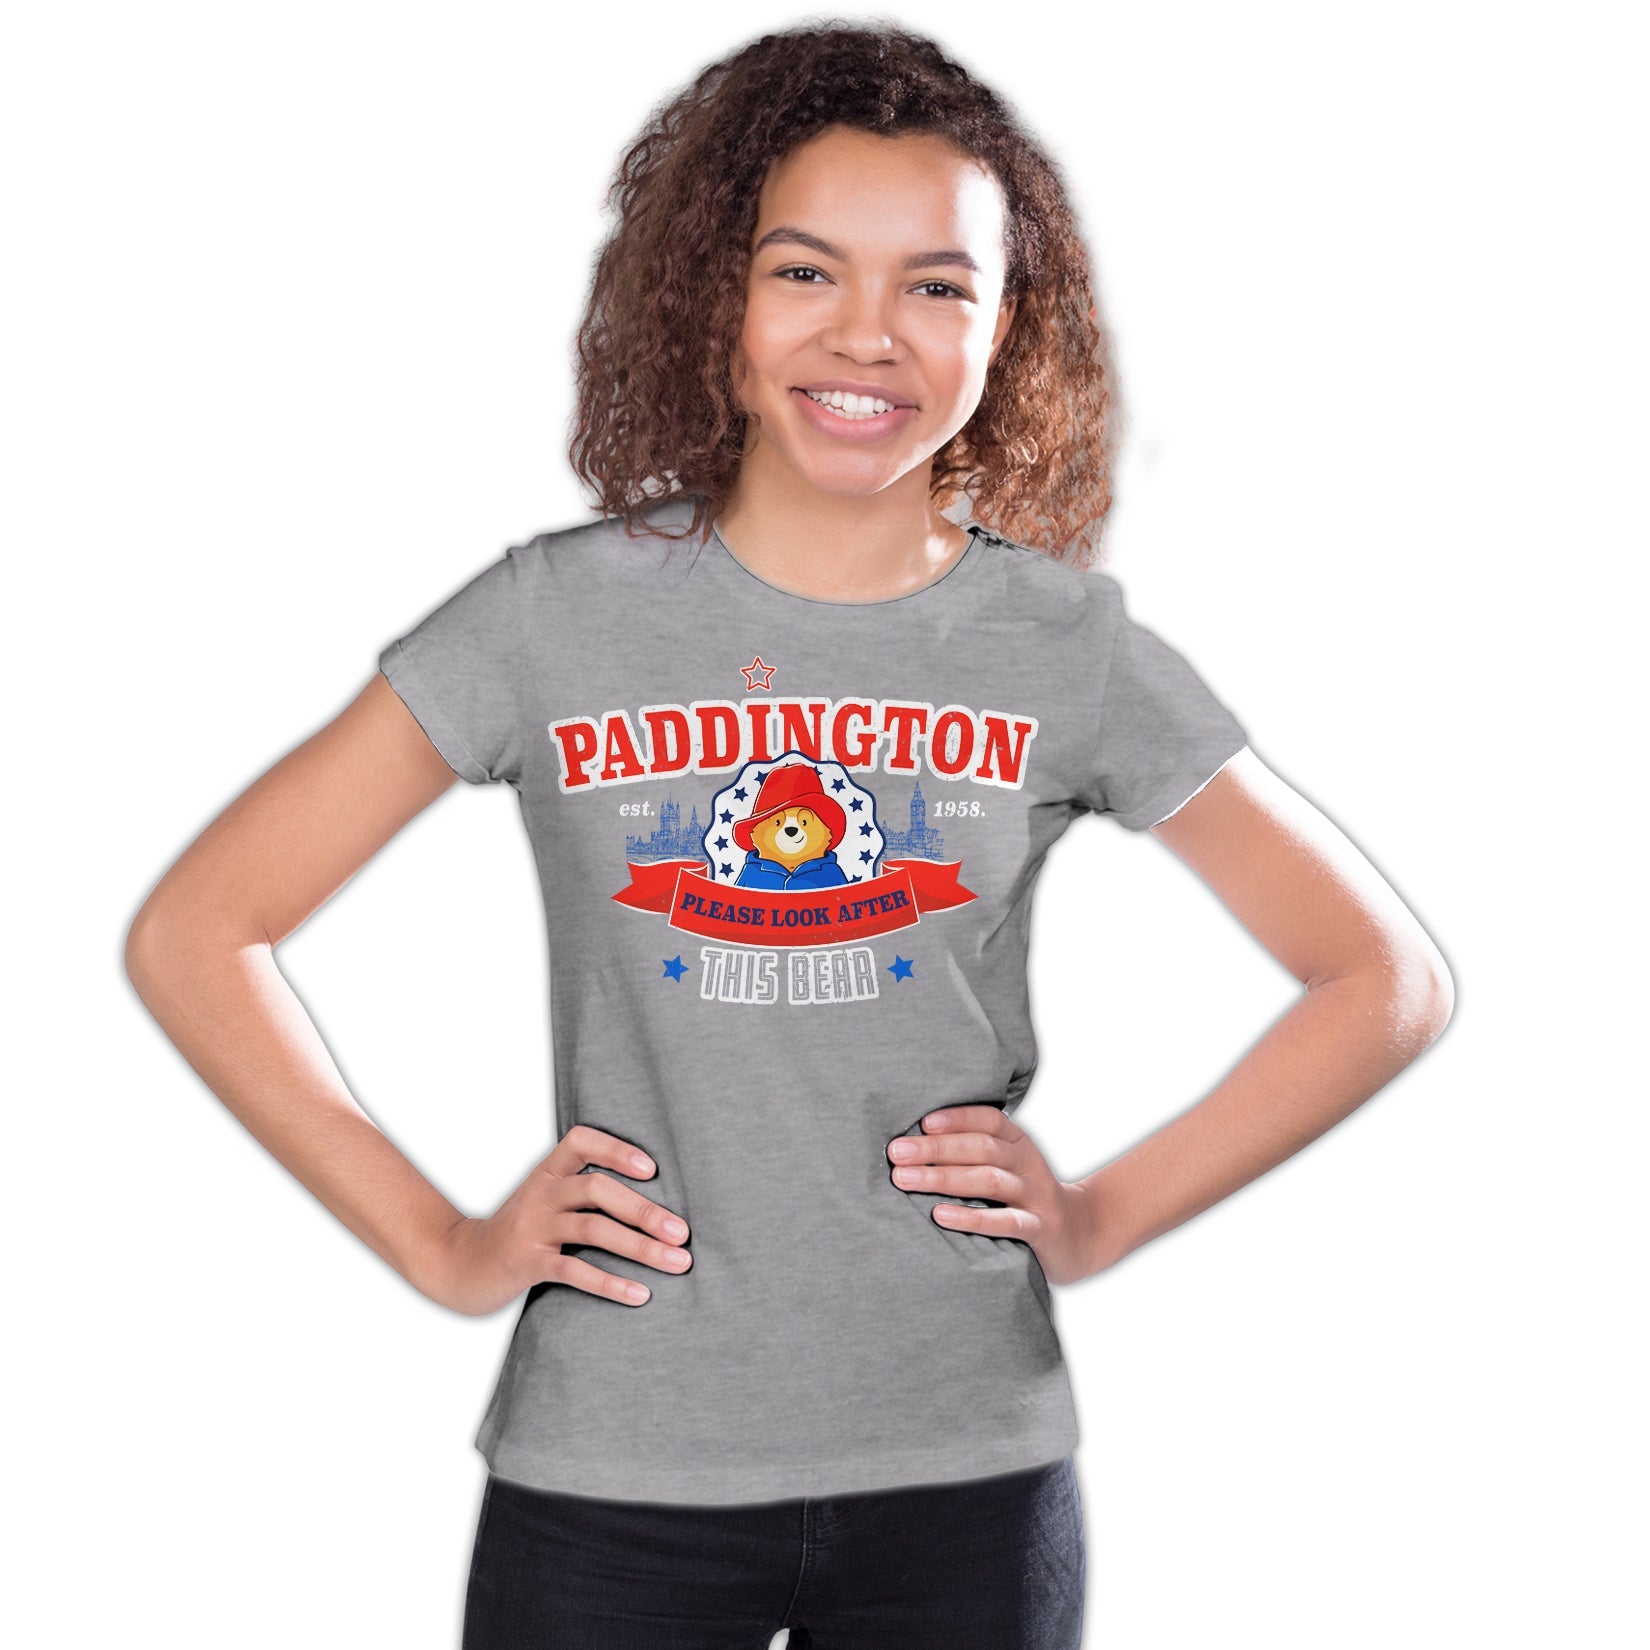 Paddington Bear Collegiate London Please Look Saturated Official Youth T-Shirt